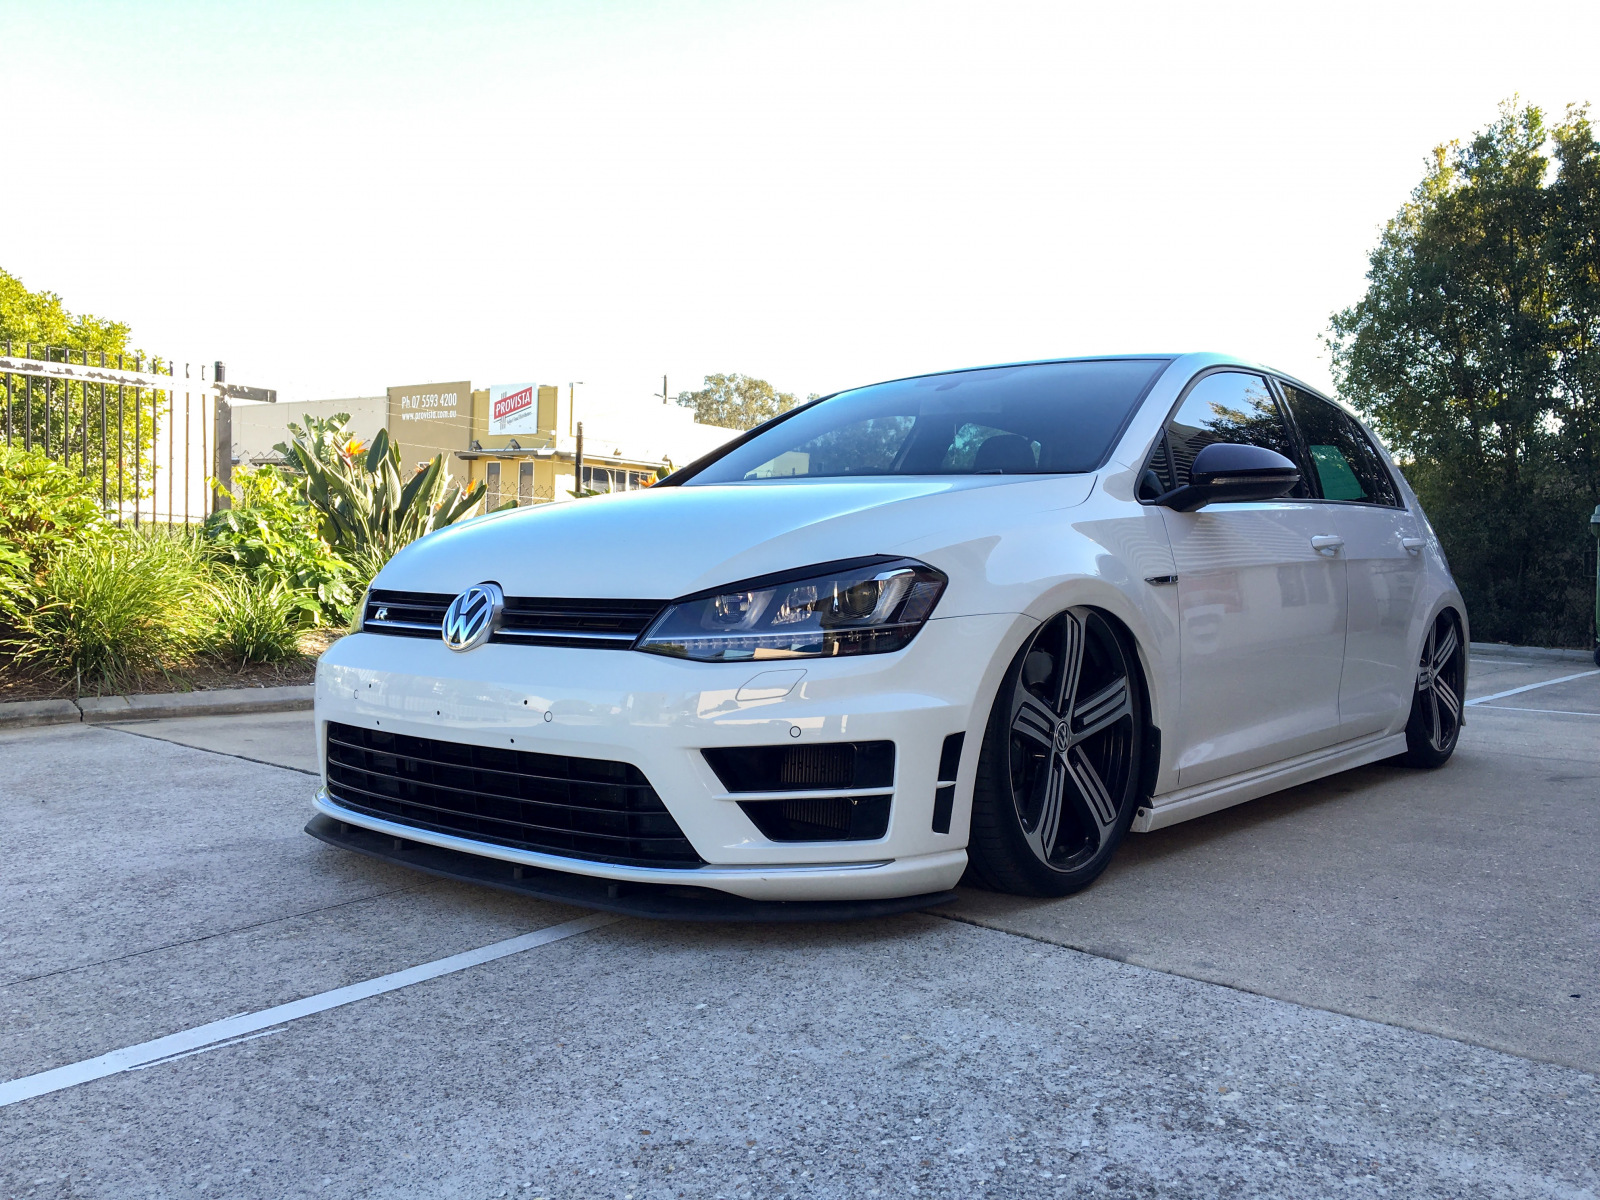 Bagged Golf - Rides By Kam